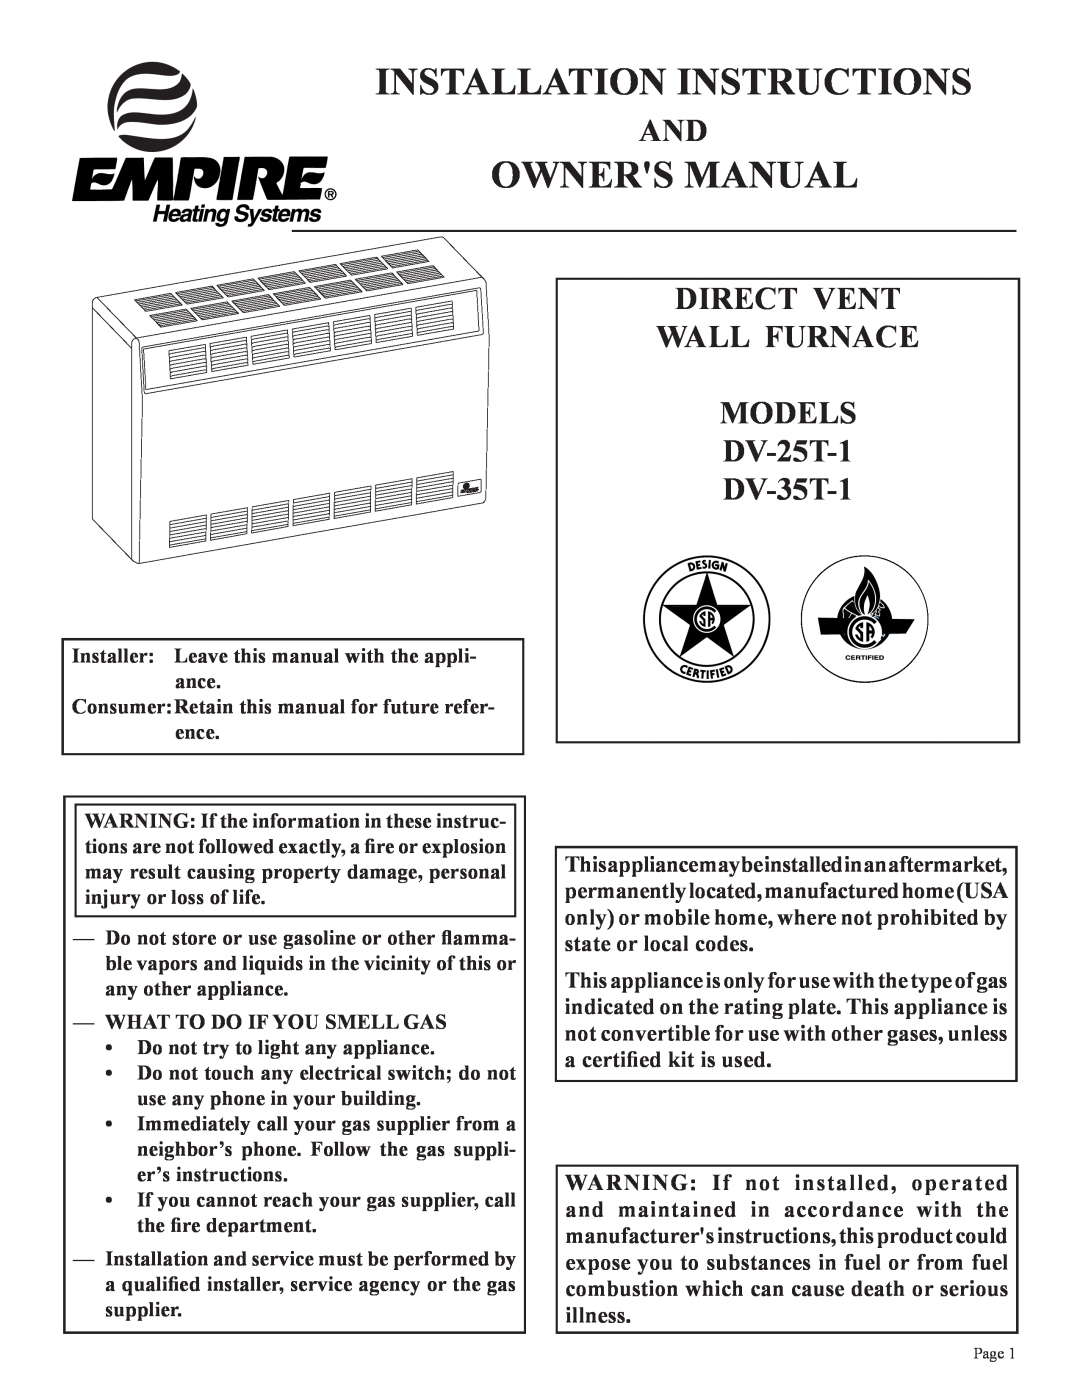 Empire Products installation instructions DIRECT VENT WALL FURNACE MODELS DV-25T-1 DV-35T-1, Installation Instructions 